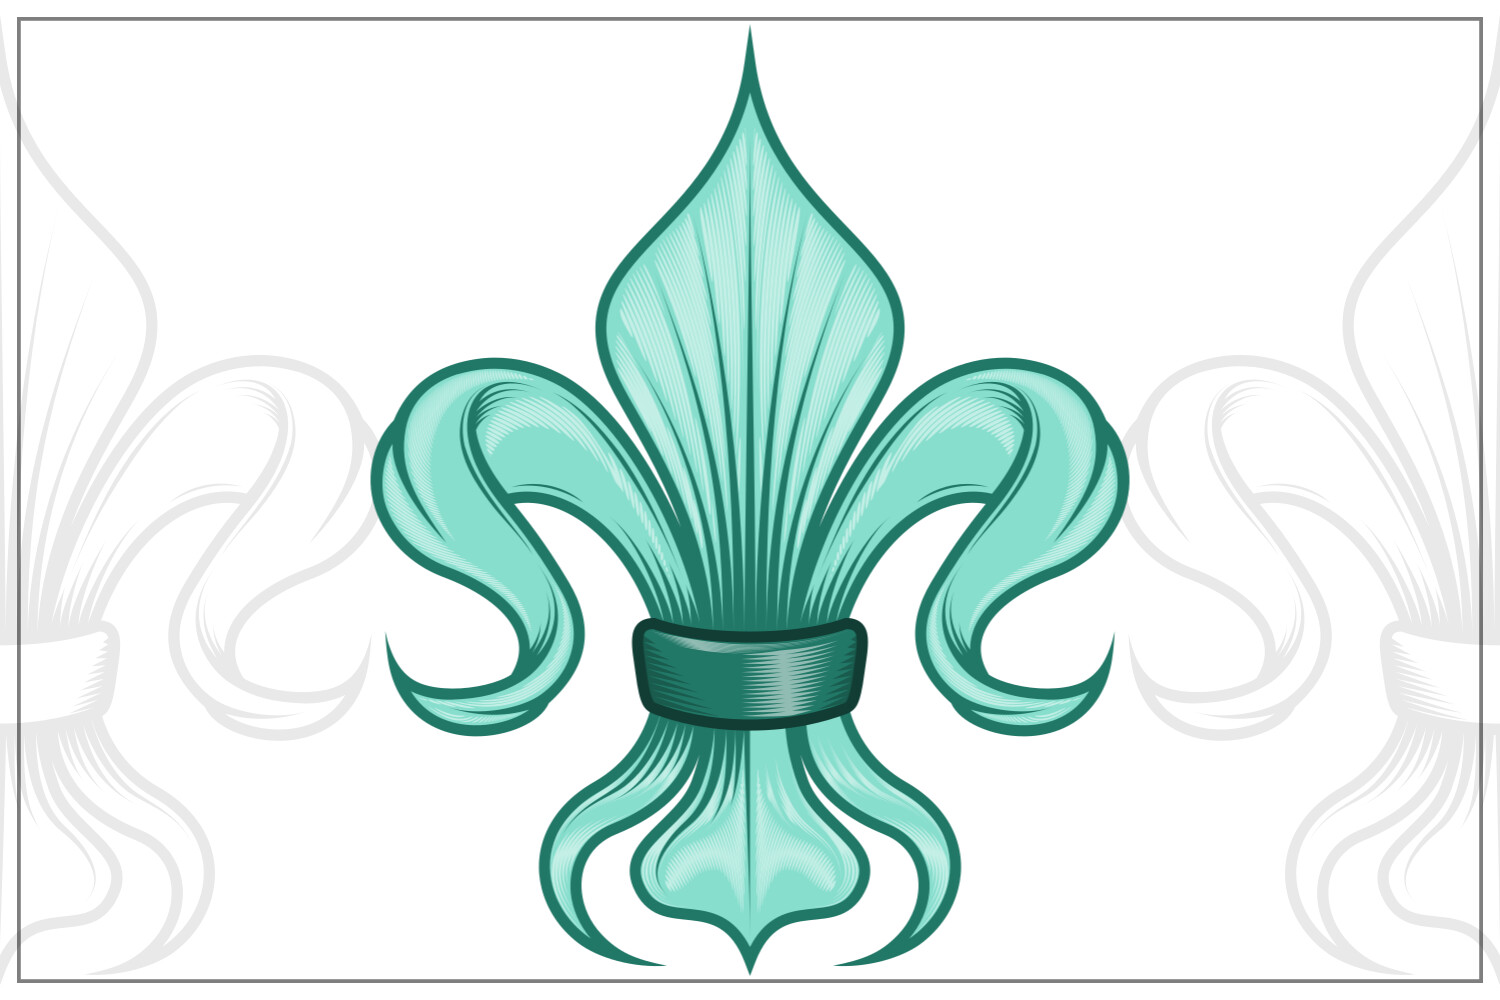 Fleur De Lis or Fluer De Lys Flower Lily Royal Medieval Heraldic Symbol  Tattoo Drawing. With Individual PNG, Jpeg, EPS and SVG Files -  Canada